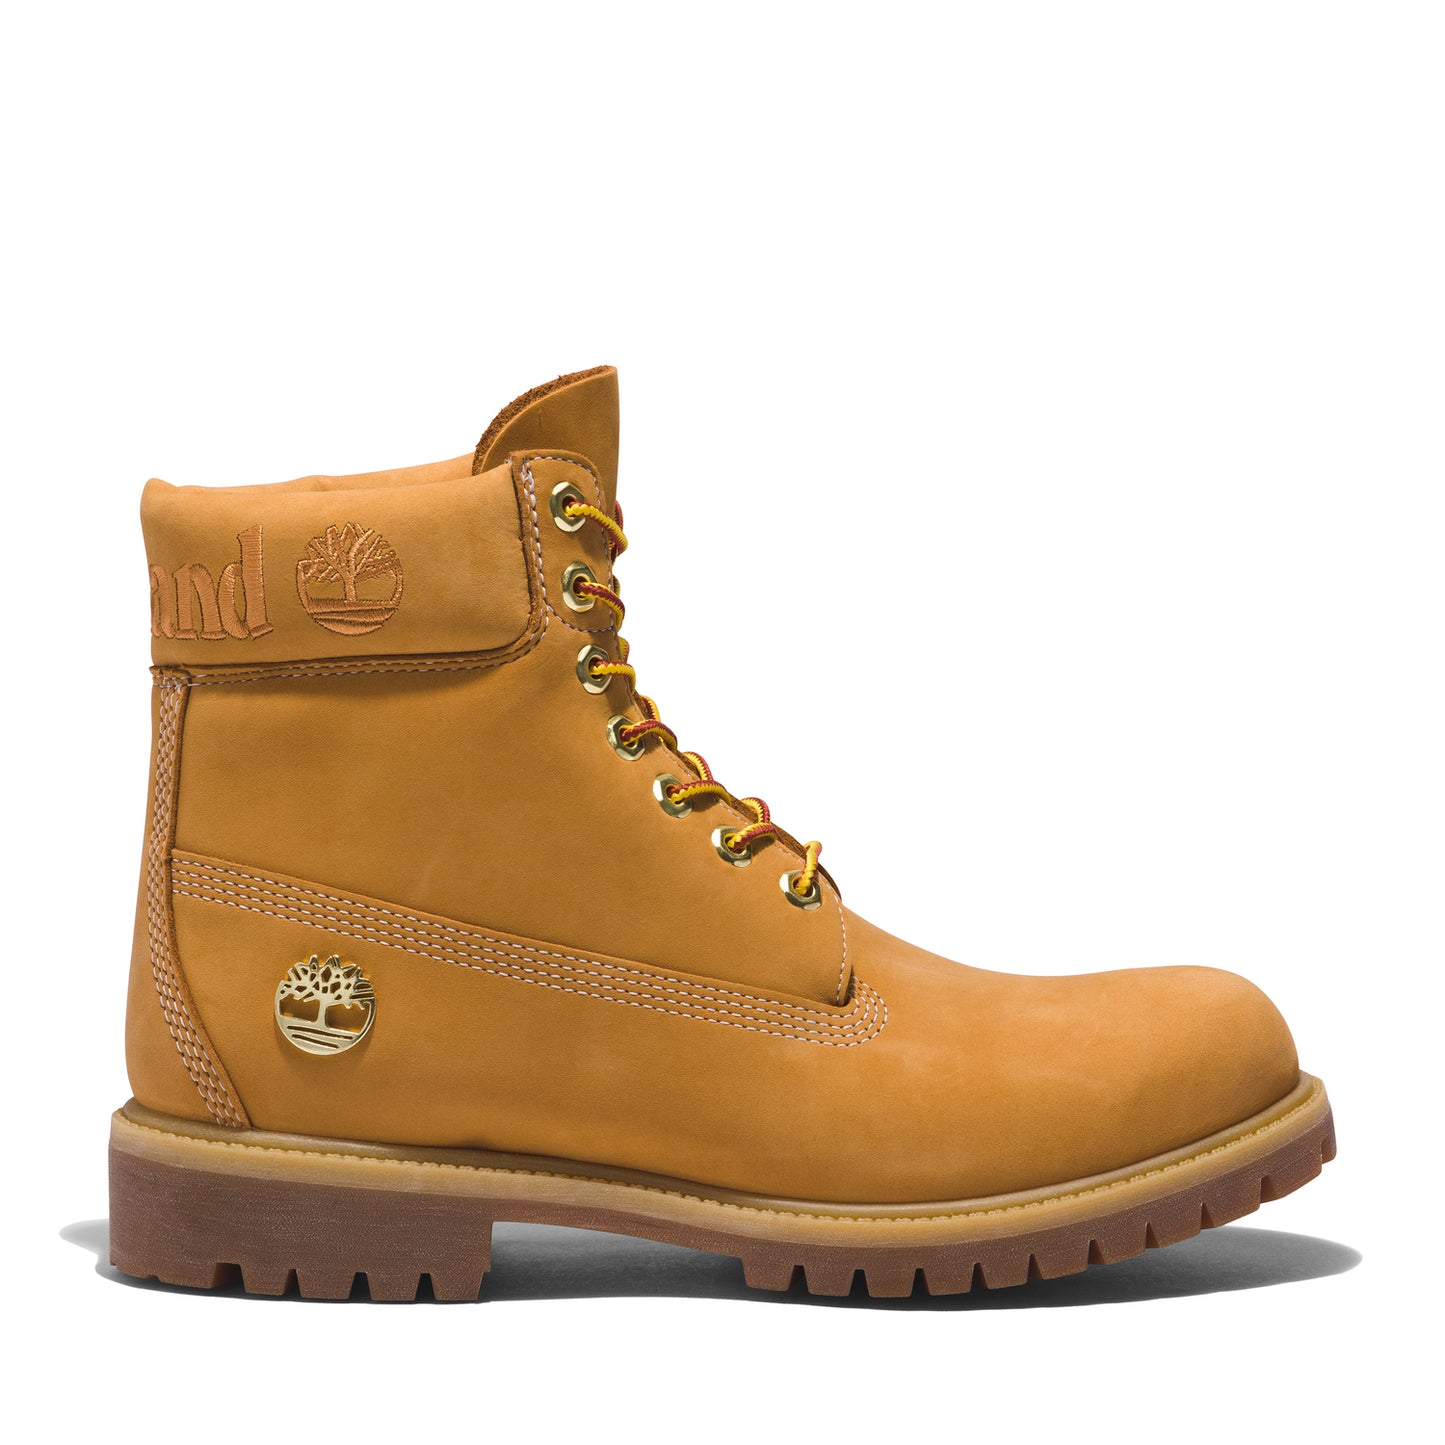 Timberland Mens 6-Inch Premium Waterproof Boot Wheat Nubuck Limited Edition GOLD BADGE - (TB0A5PJP 231) - PY- R2L17 - L/P